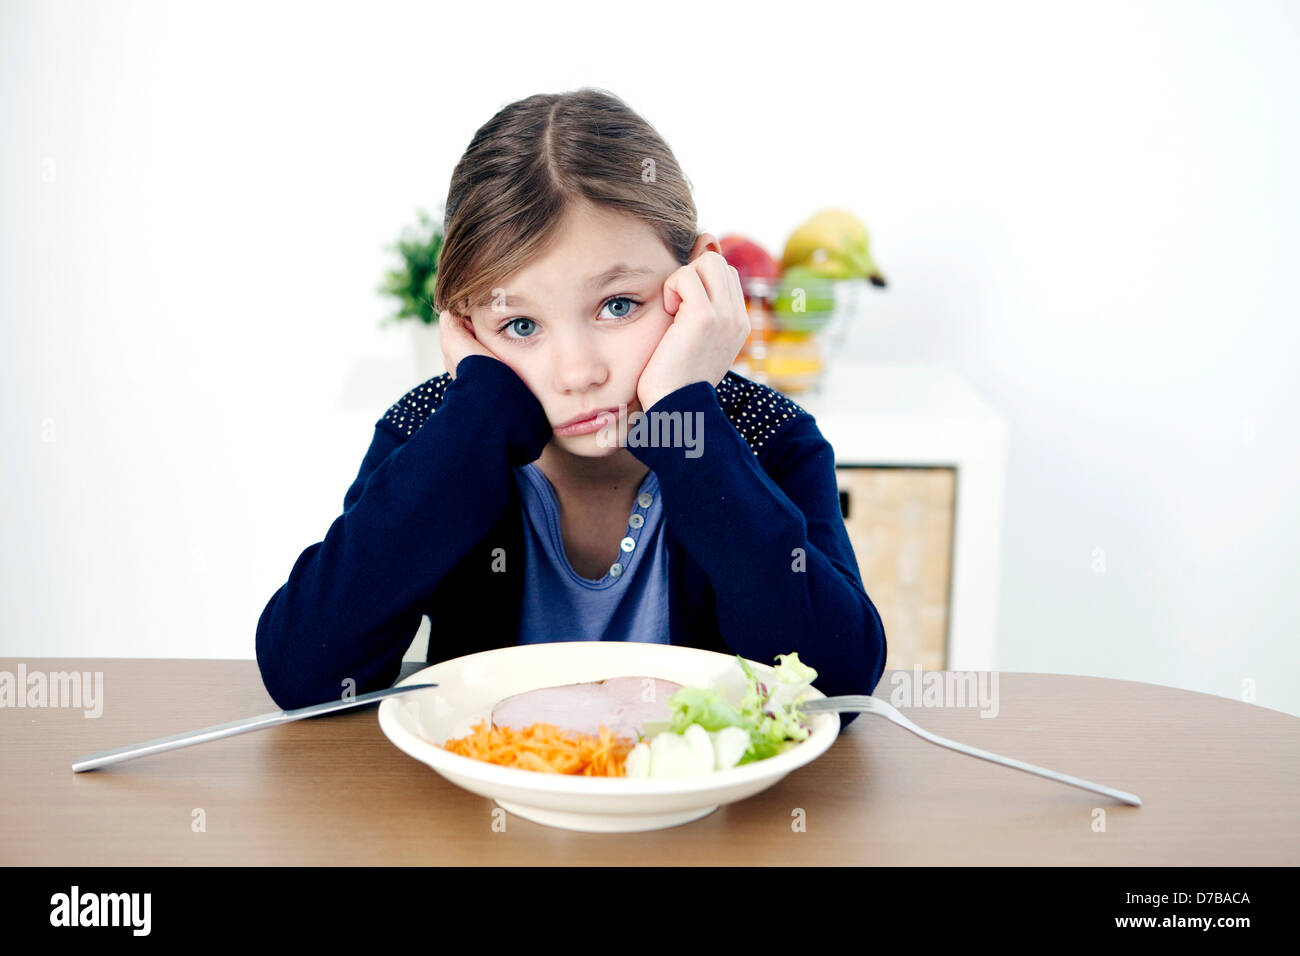 CHILD EATING A MEAL Stock Photo